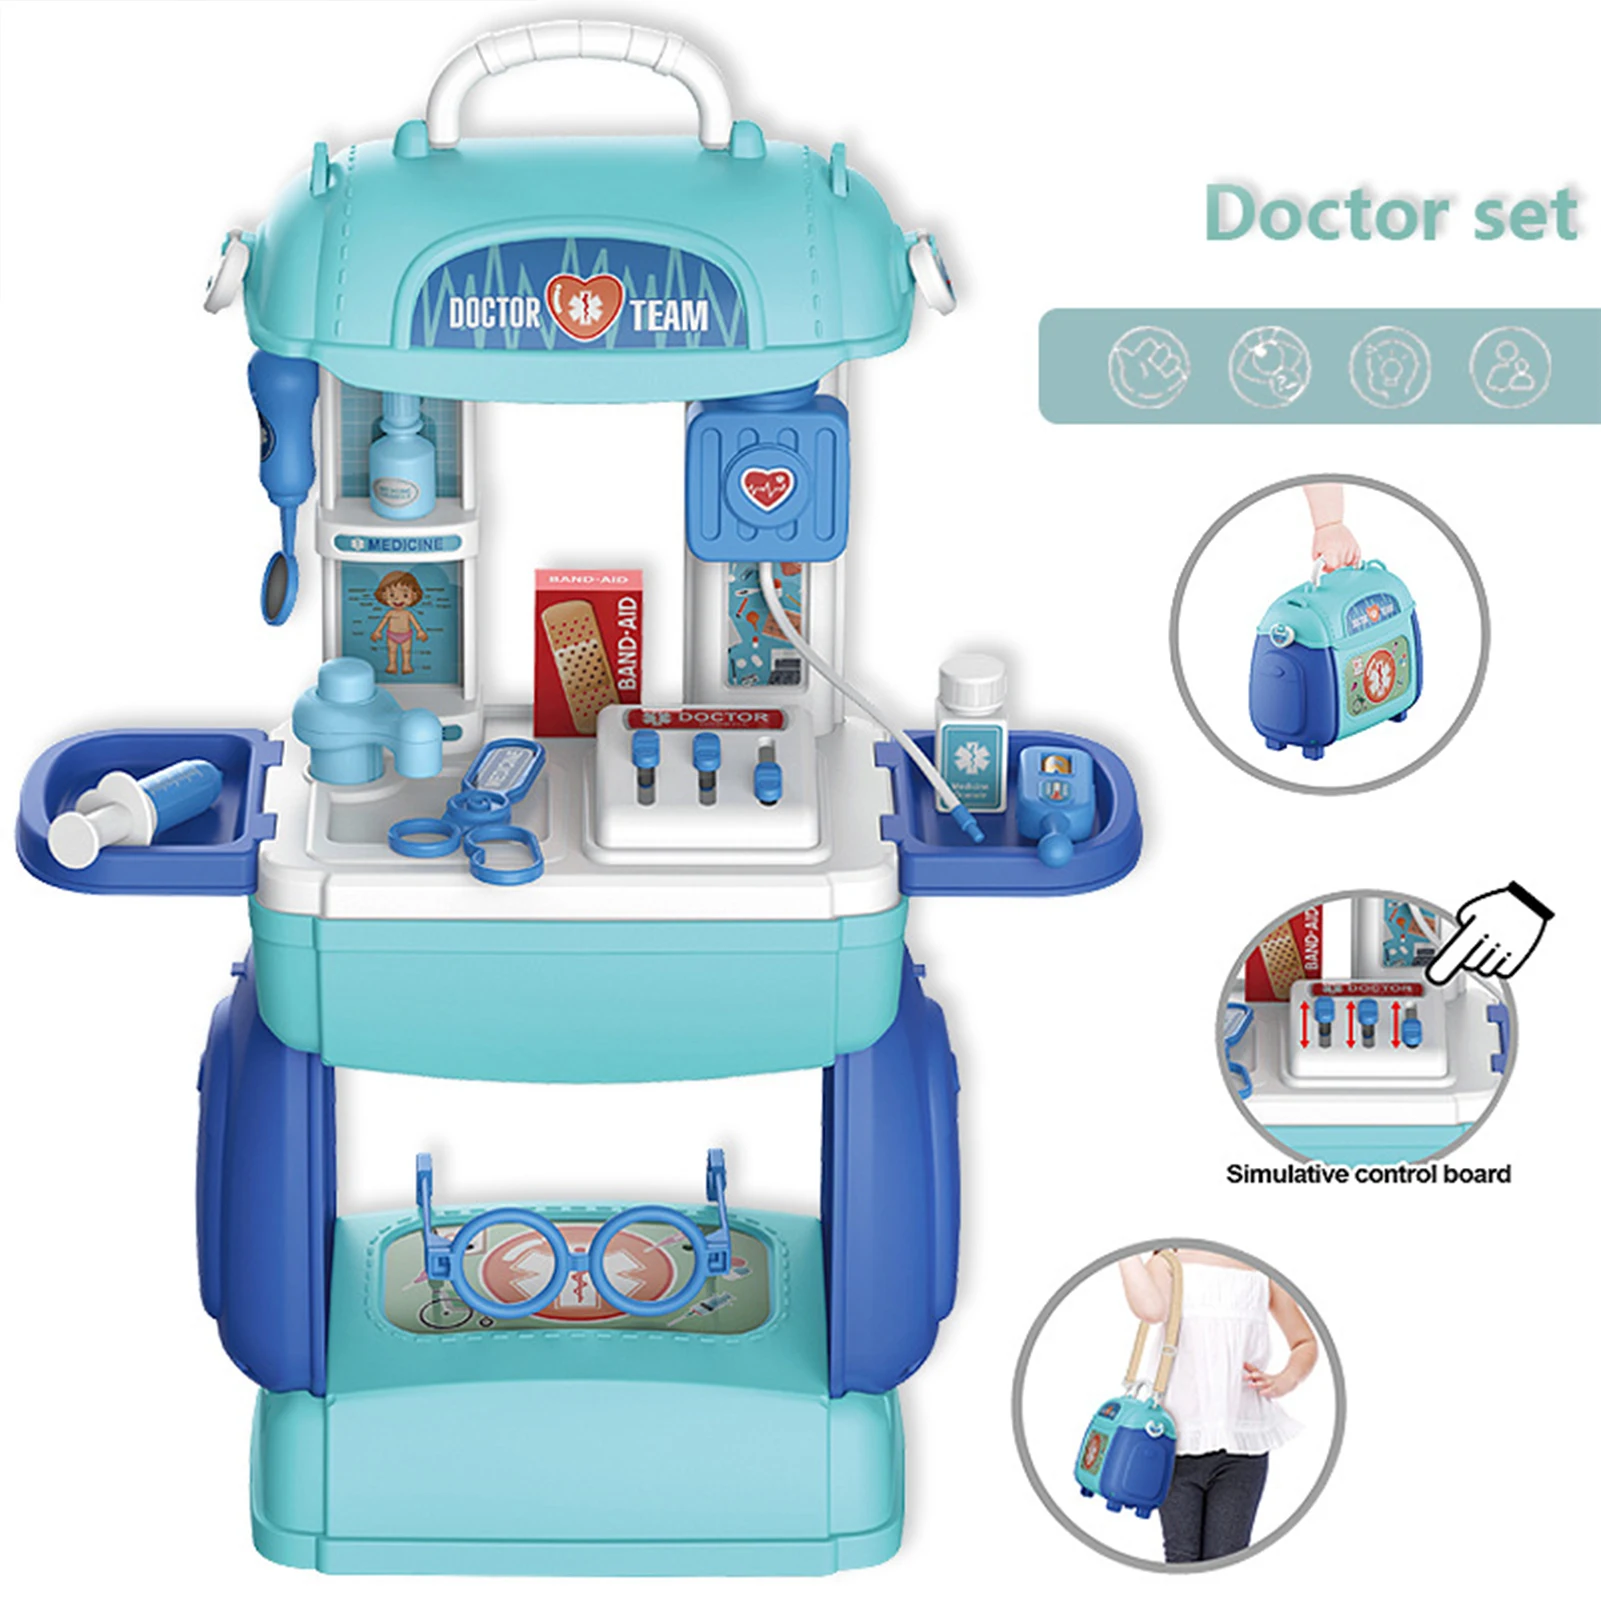 

Children Doctor Pretend Play Simulation Medical Toy Set Odorless Suitcase With Messenger Bag For Children's Fun vividly